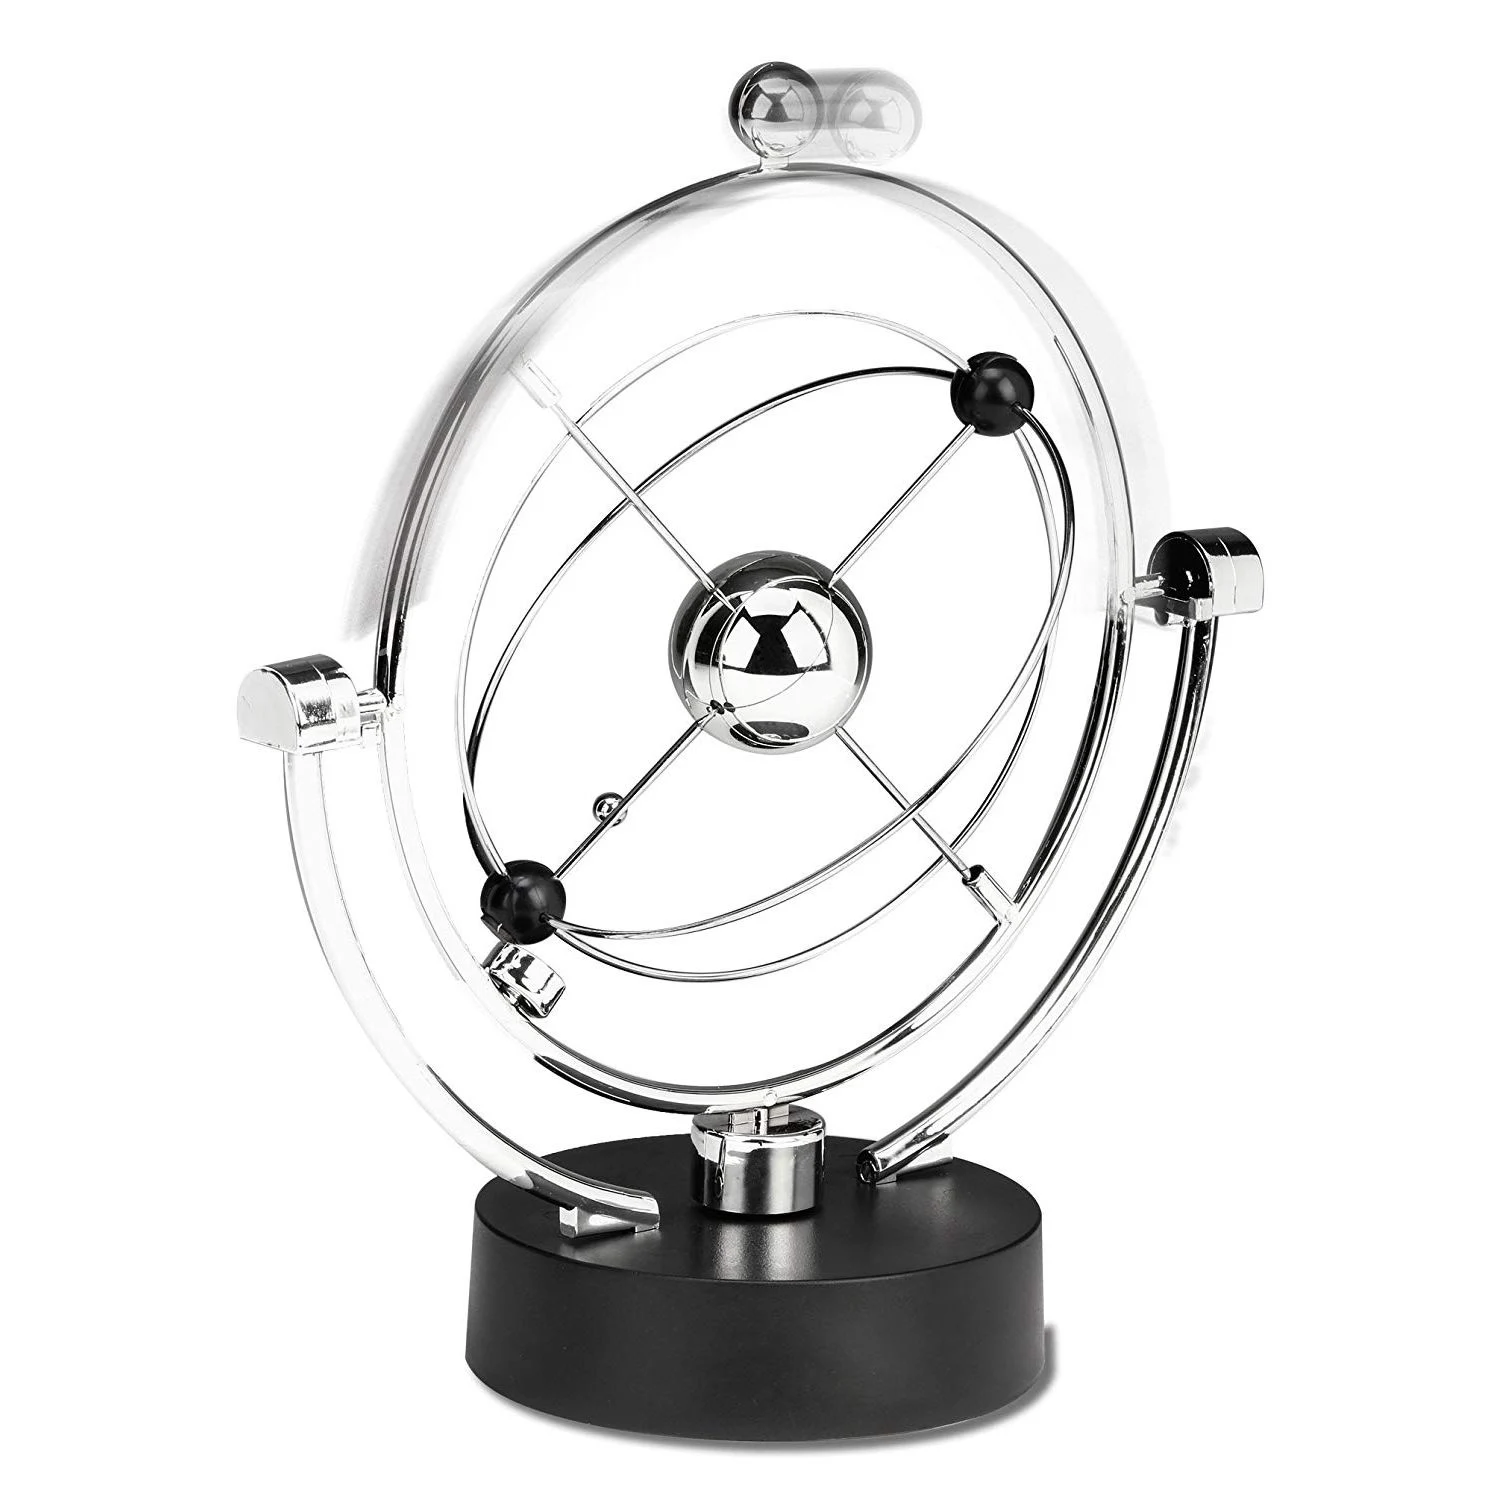 New Perpetual Motion Desk Sculpture Toy - Kinetic Art Galaxy Planet Balance Mobile - Magnetic Executive Office Home Decor Tabl